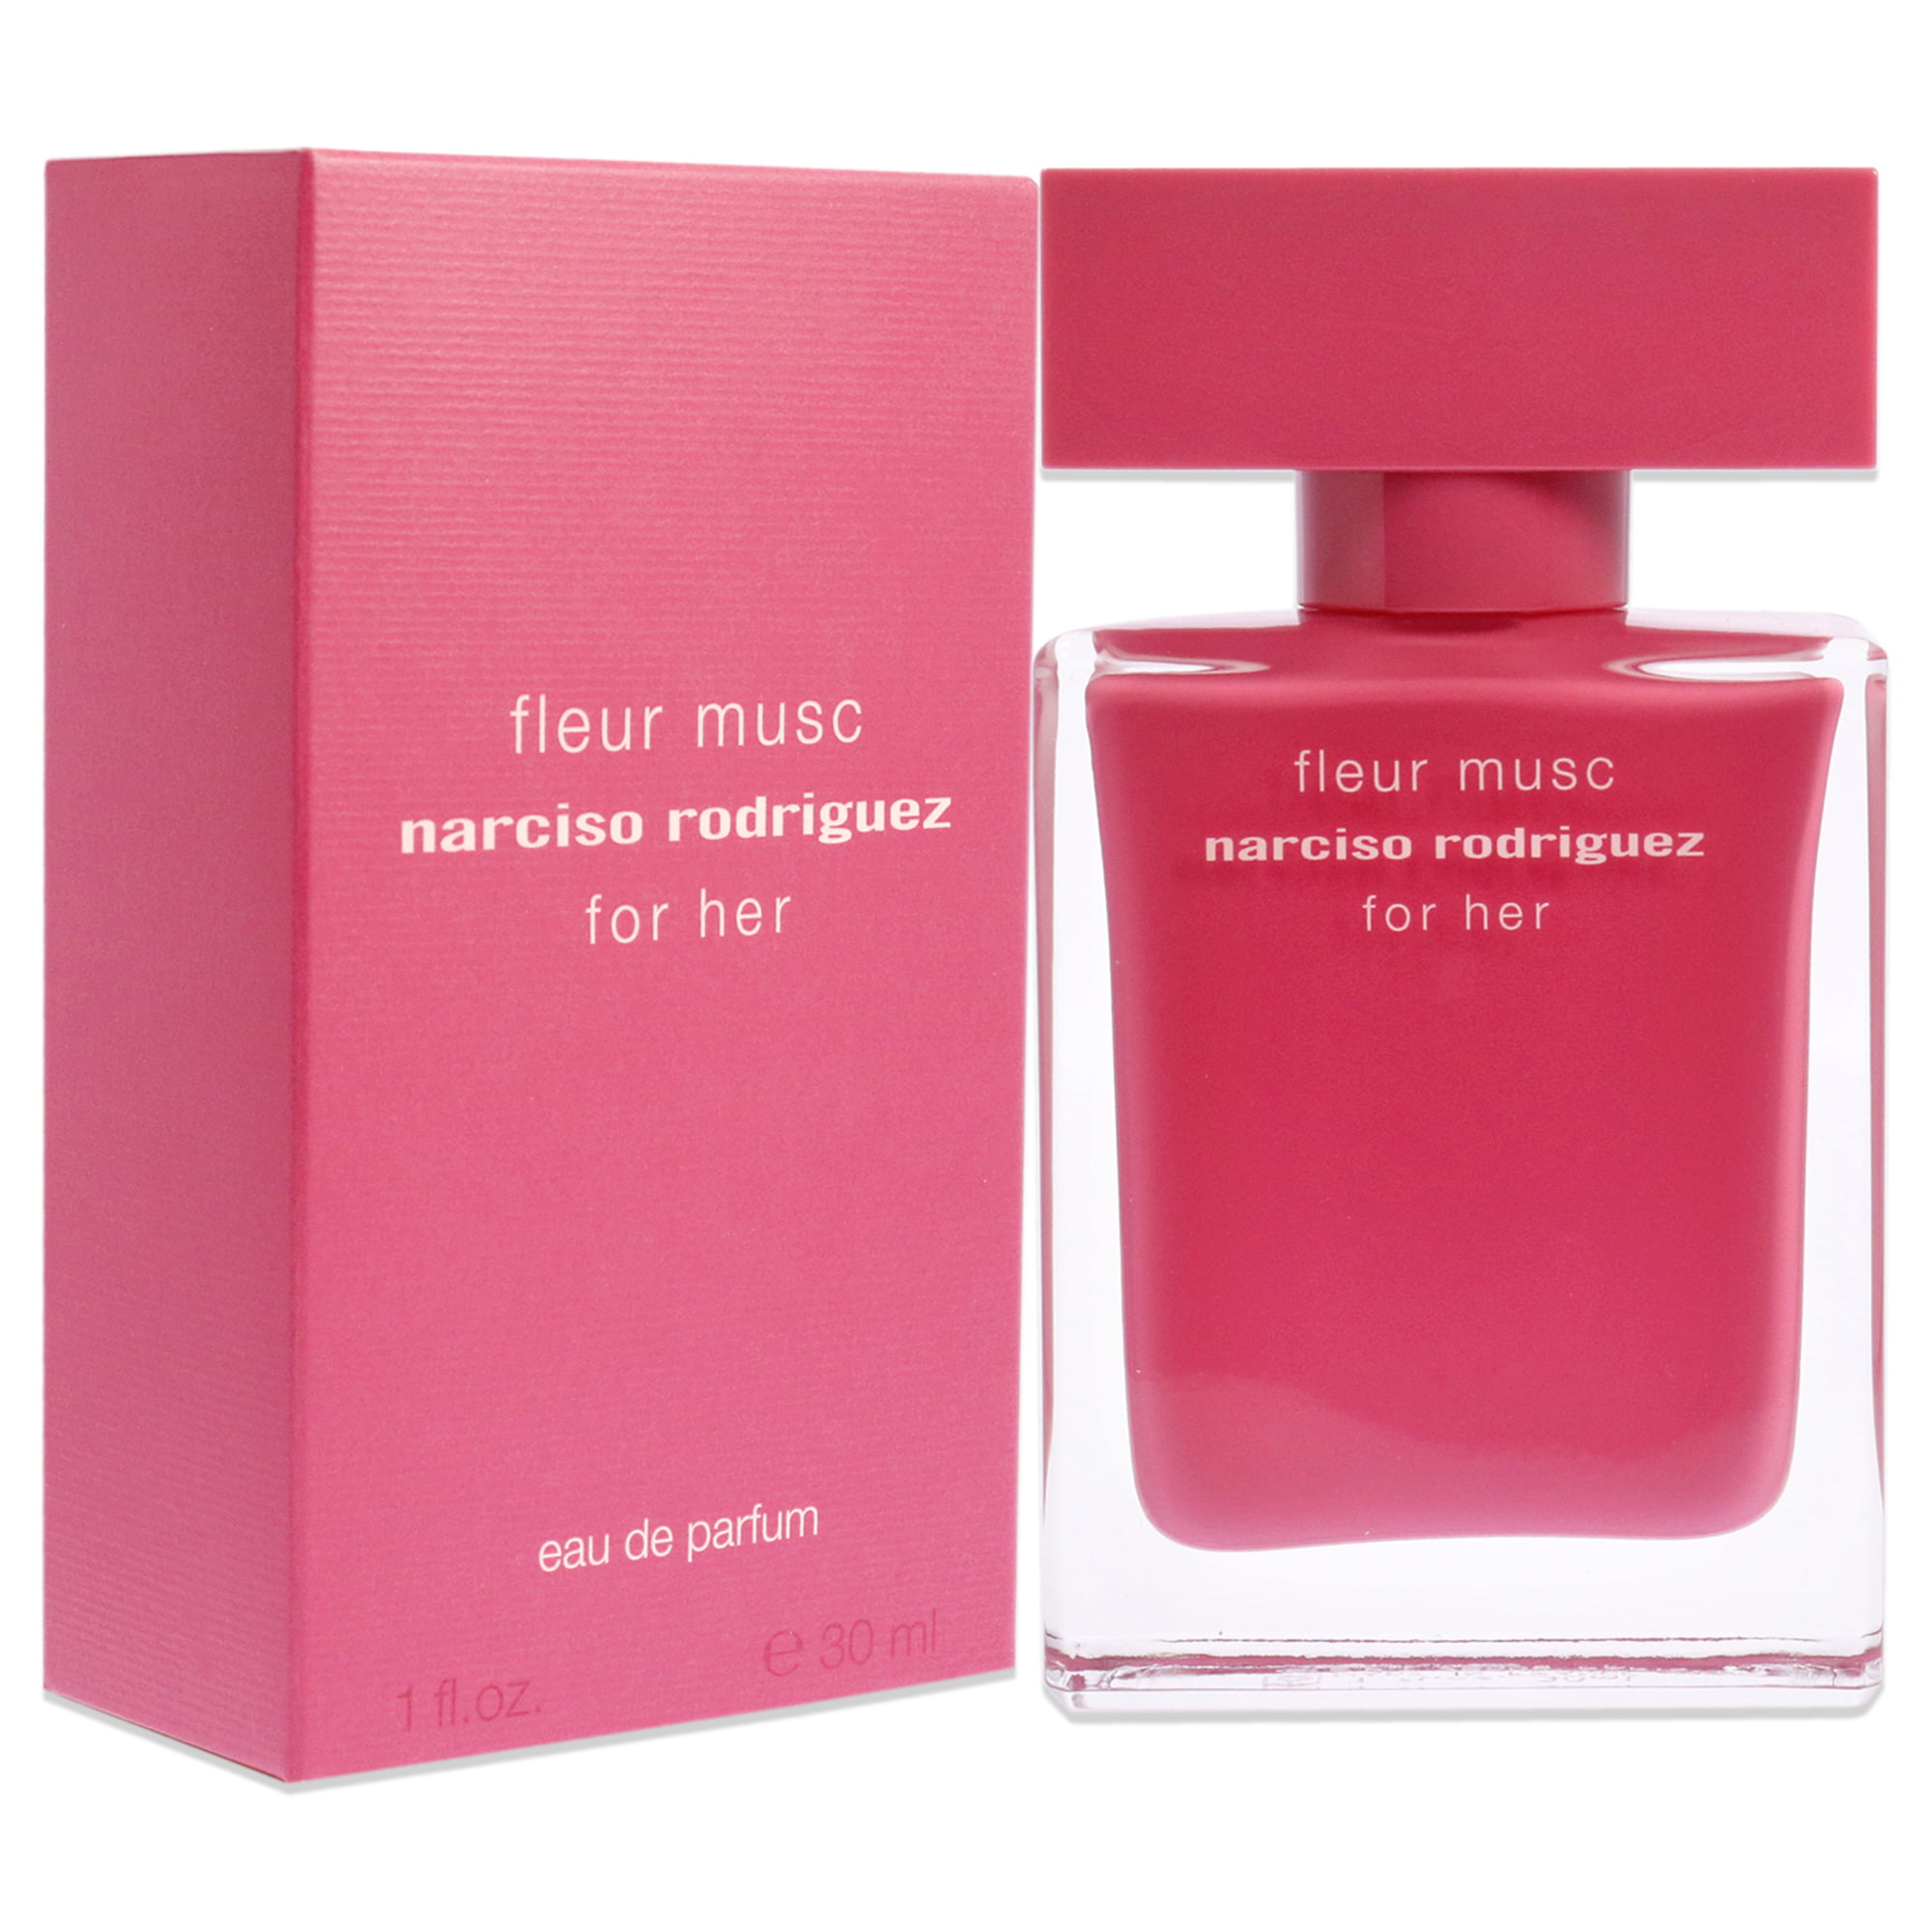 Флер муск. Narciso Rodriguez for her fleur Musc EDP 100ml. Fleur Musc Narciso Rodriguez for her. Тестер Narciso Rodriguez fleur Musc for her EDP, 100 ml. Narciso Rodriguez fleur Musc 100 мл.